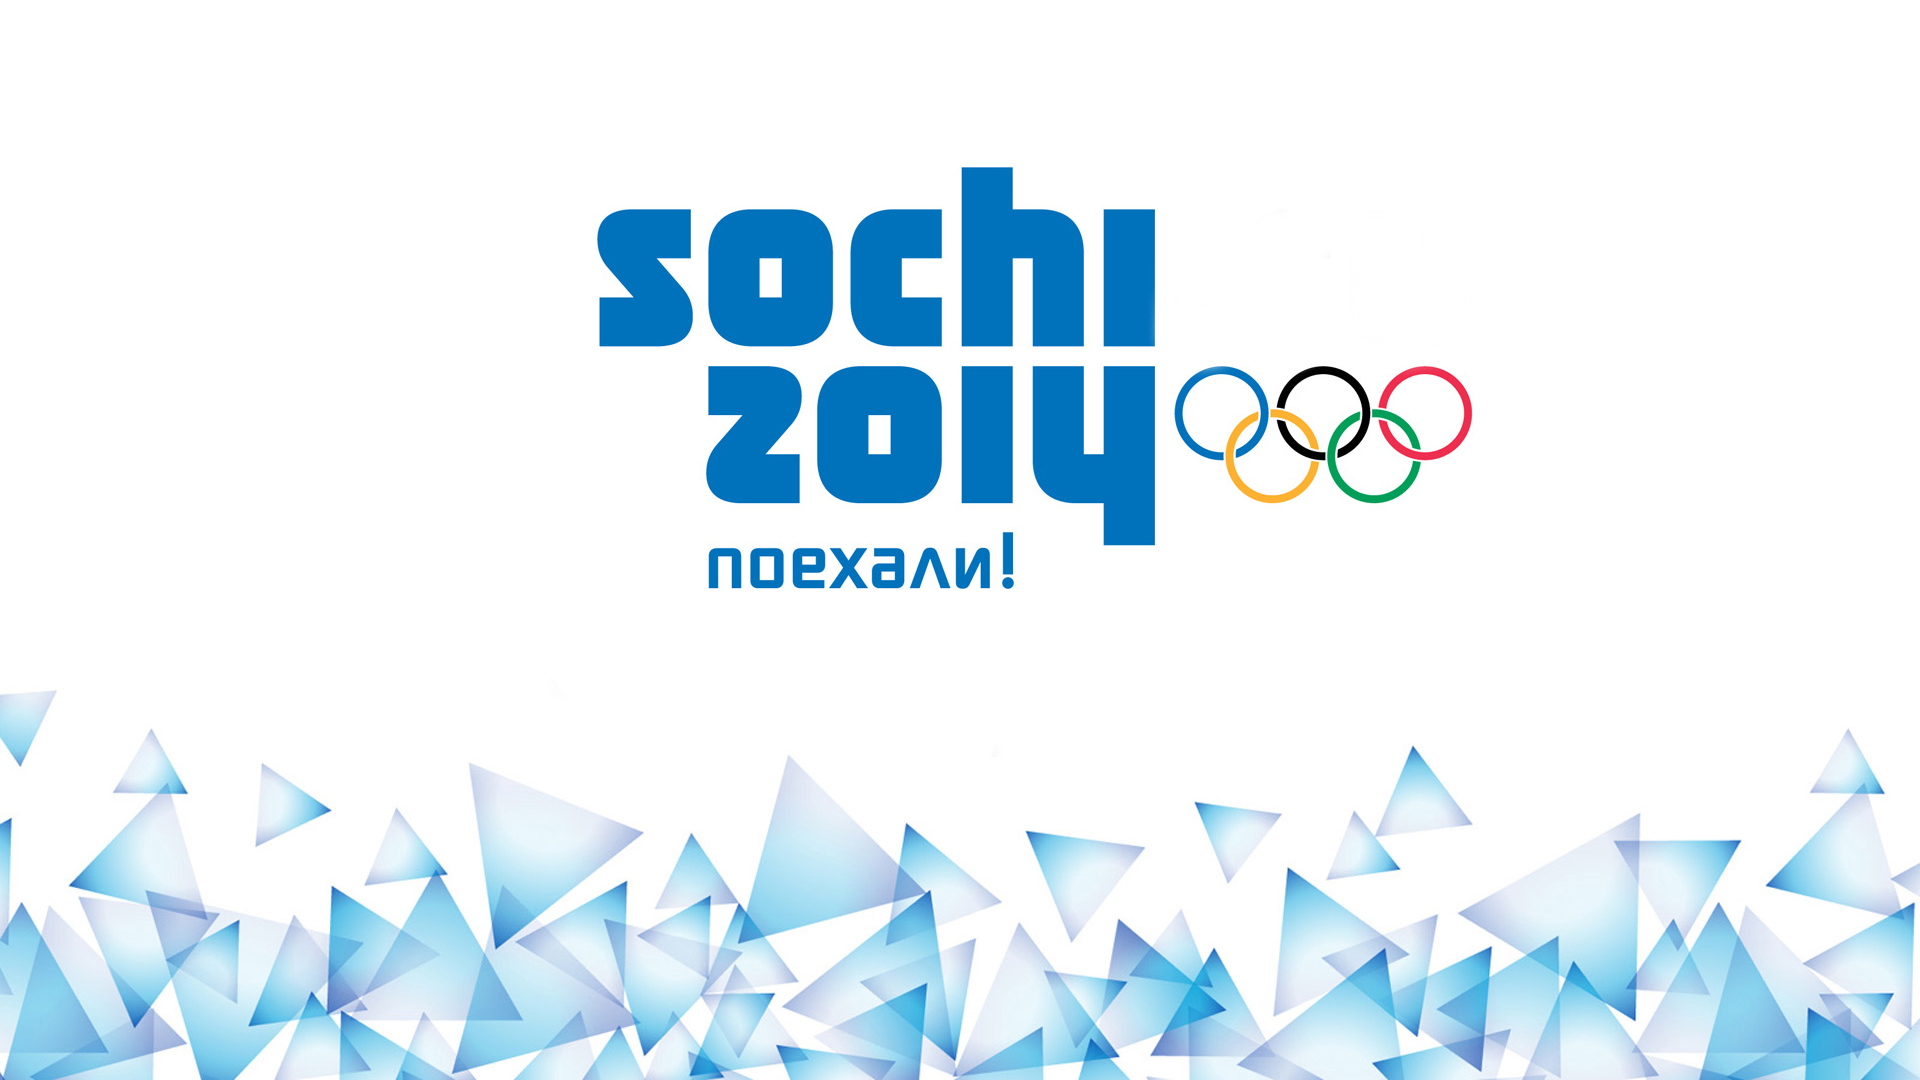 Nice Images Collection: Winter Olimpic Games Sochi 2014 Desktop Wallpapers